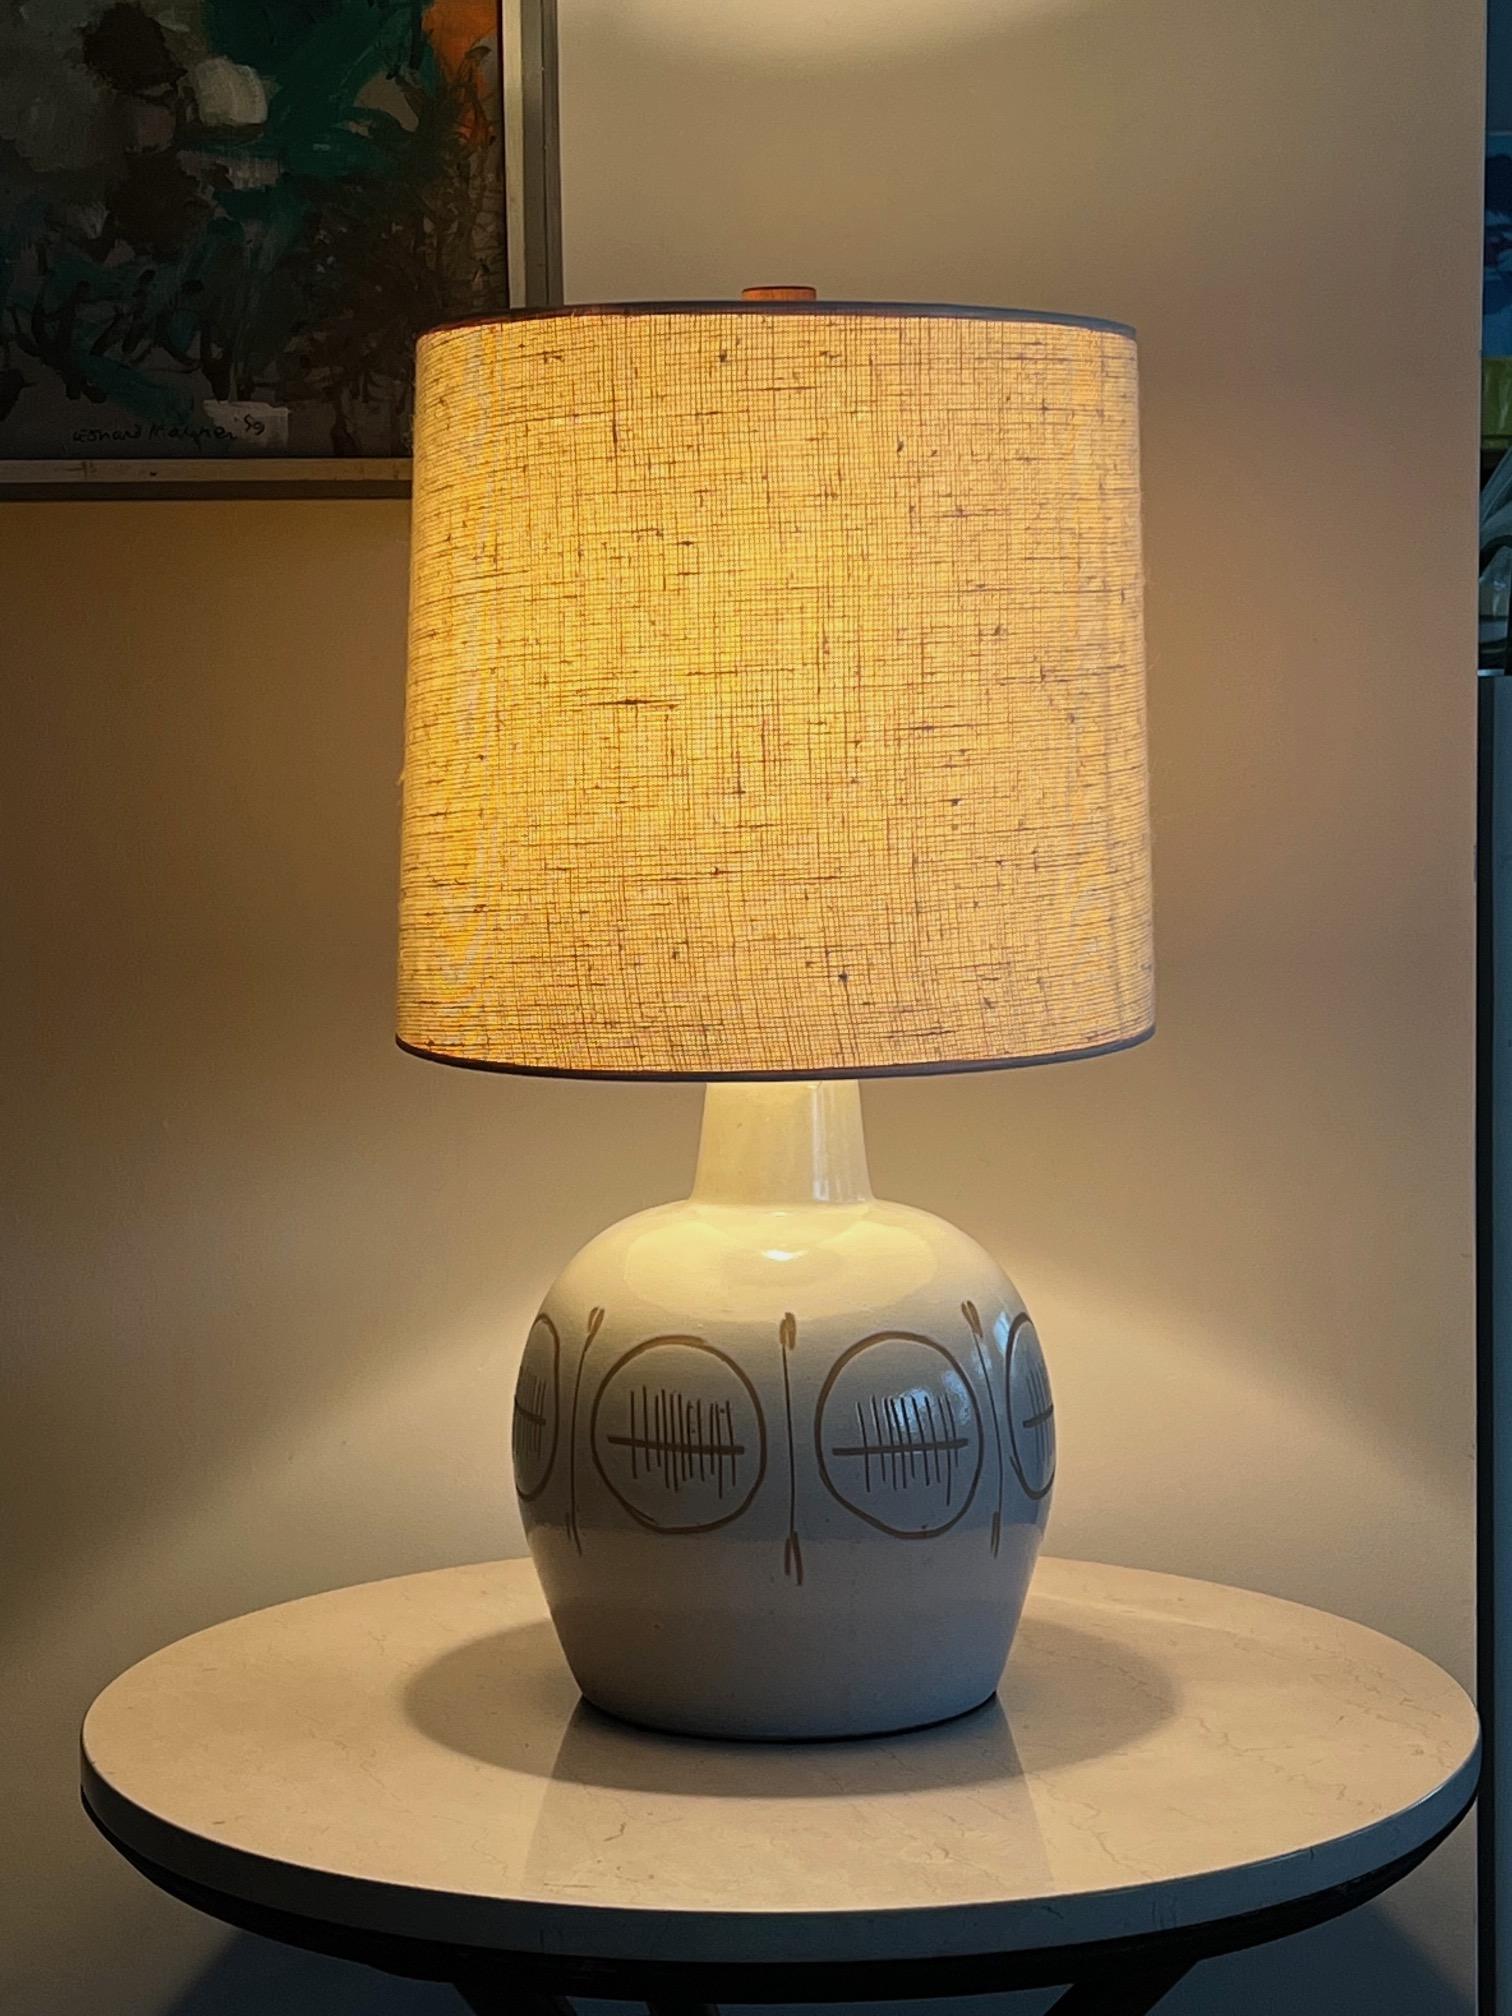 Martz Ceramic Lamp with Sgraffito Decoration In Good Condition For Sale In St.Petersburg, FL